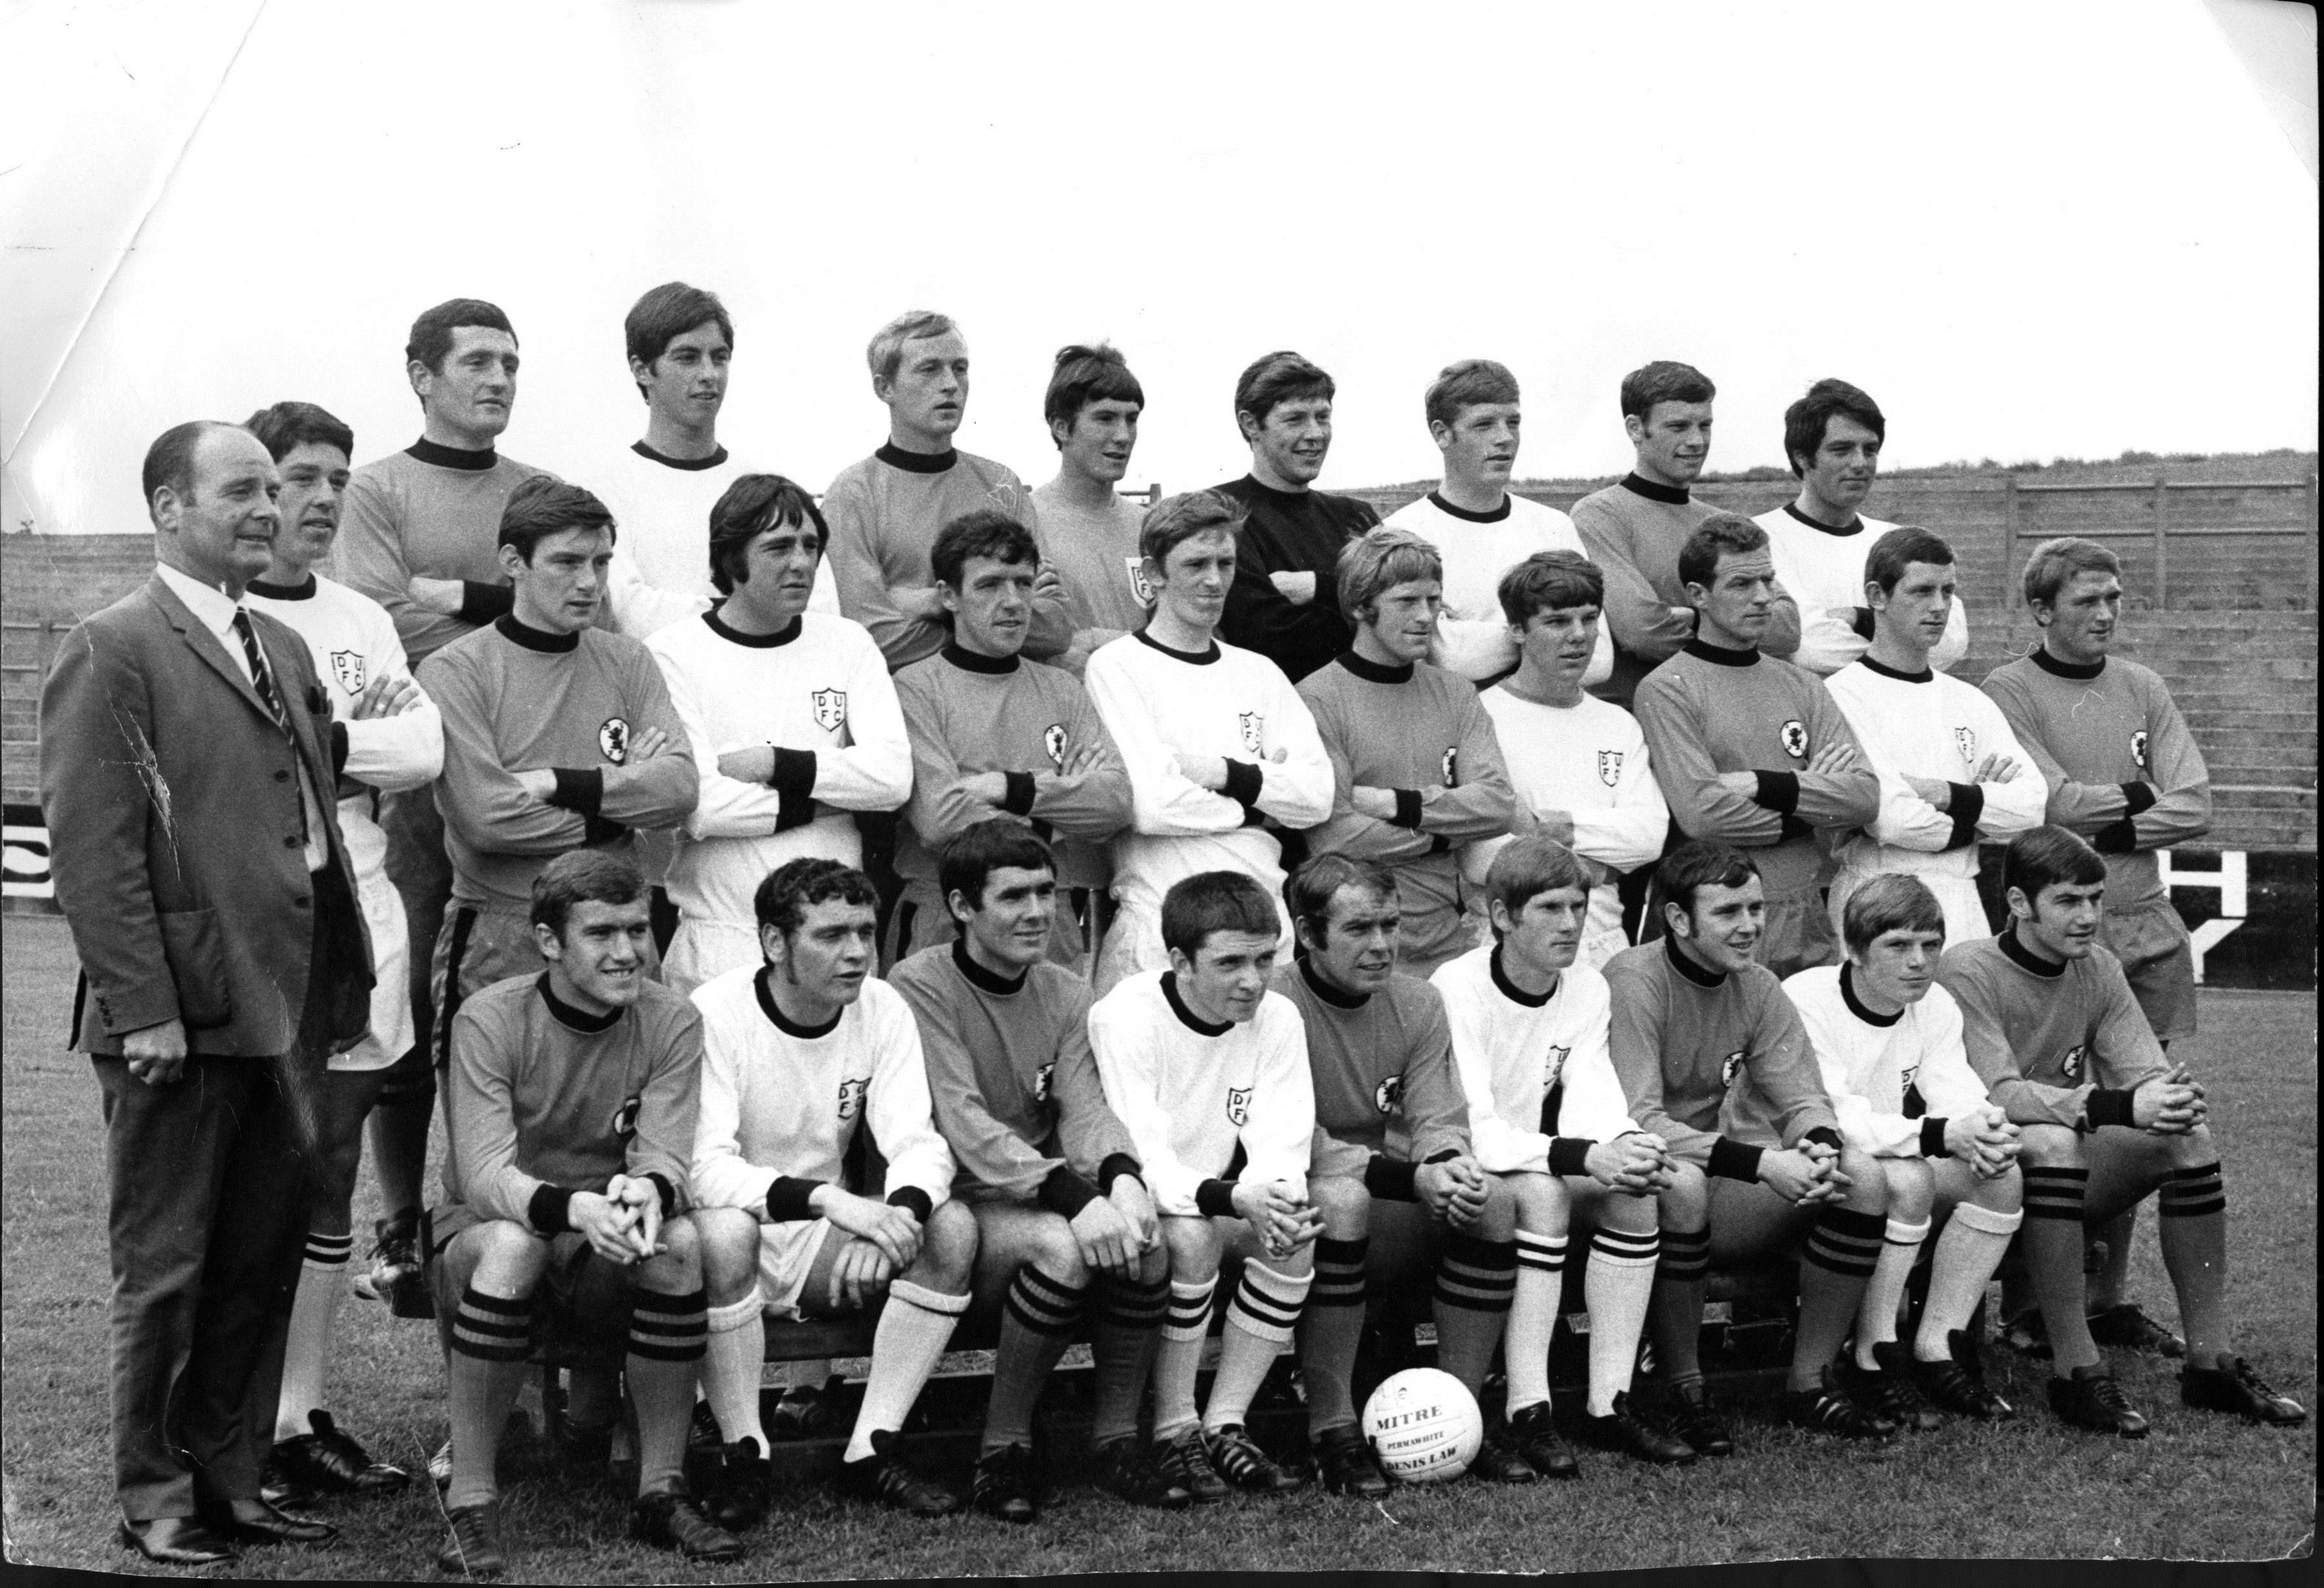 The Dundee United 1961 line-up, with Stuart Markland on the far right of the middle row.